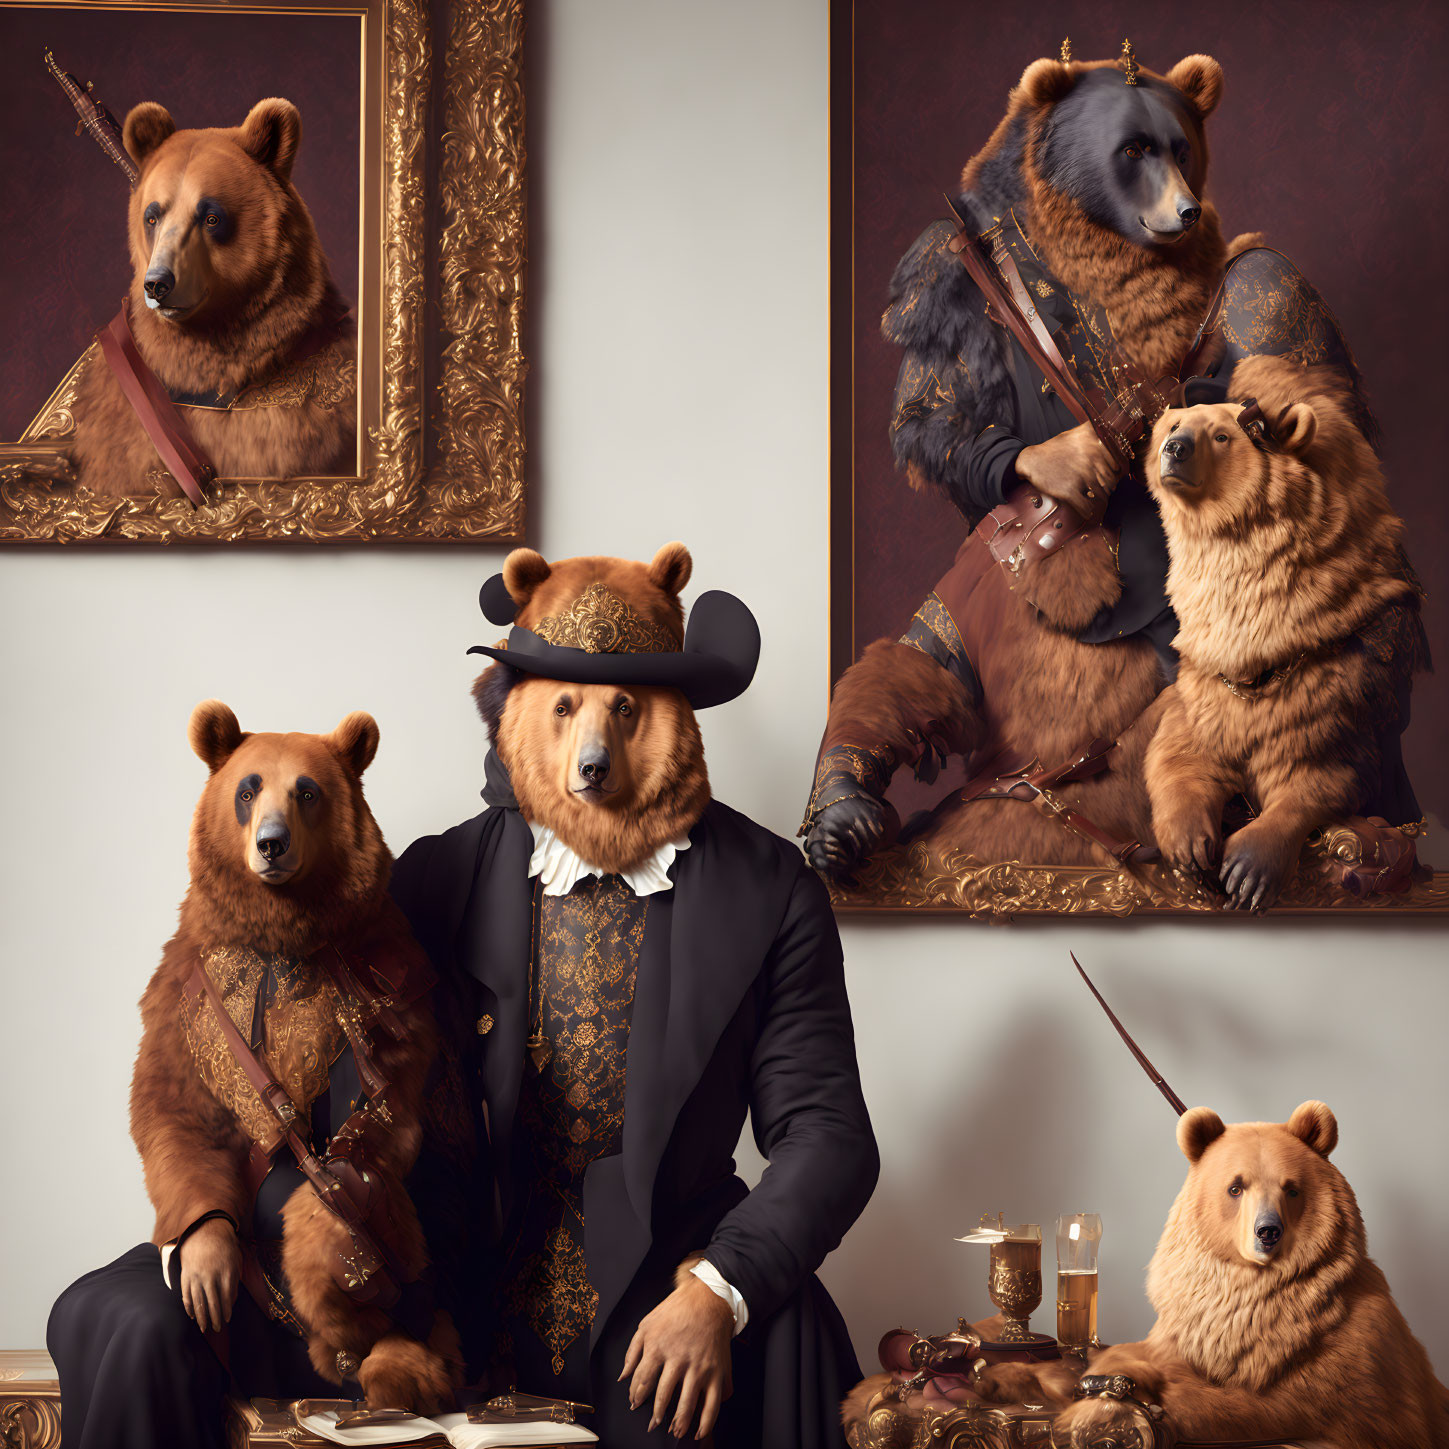 Whimsical portrait of bears in vintage attire with classic painting